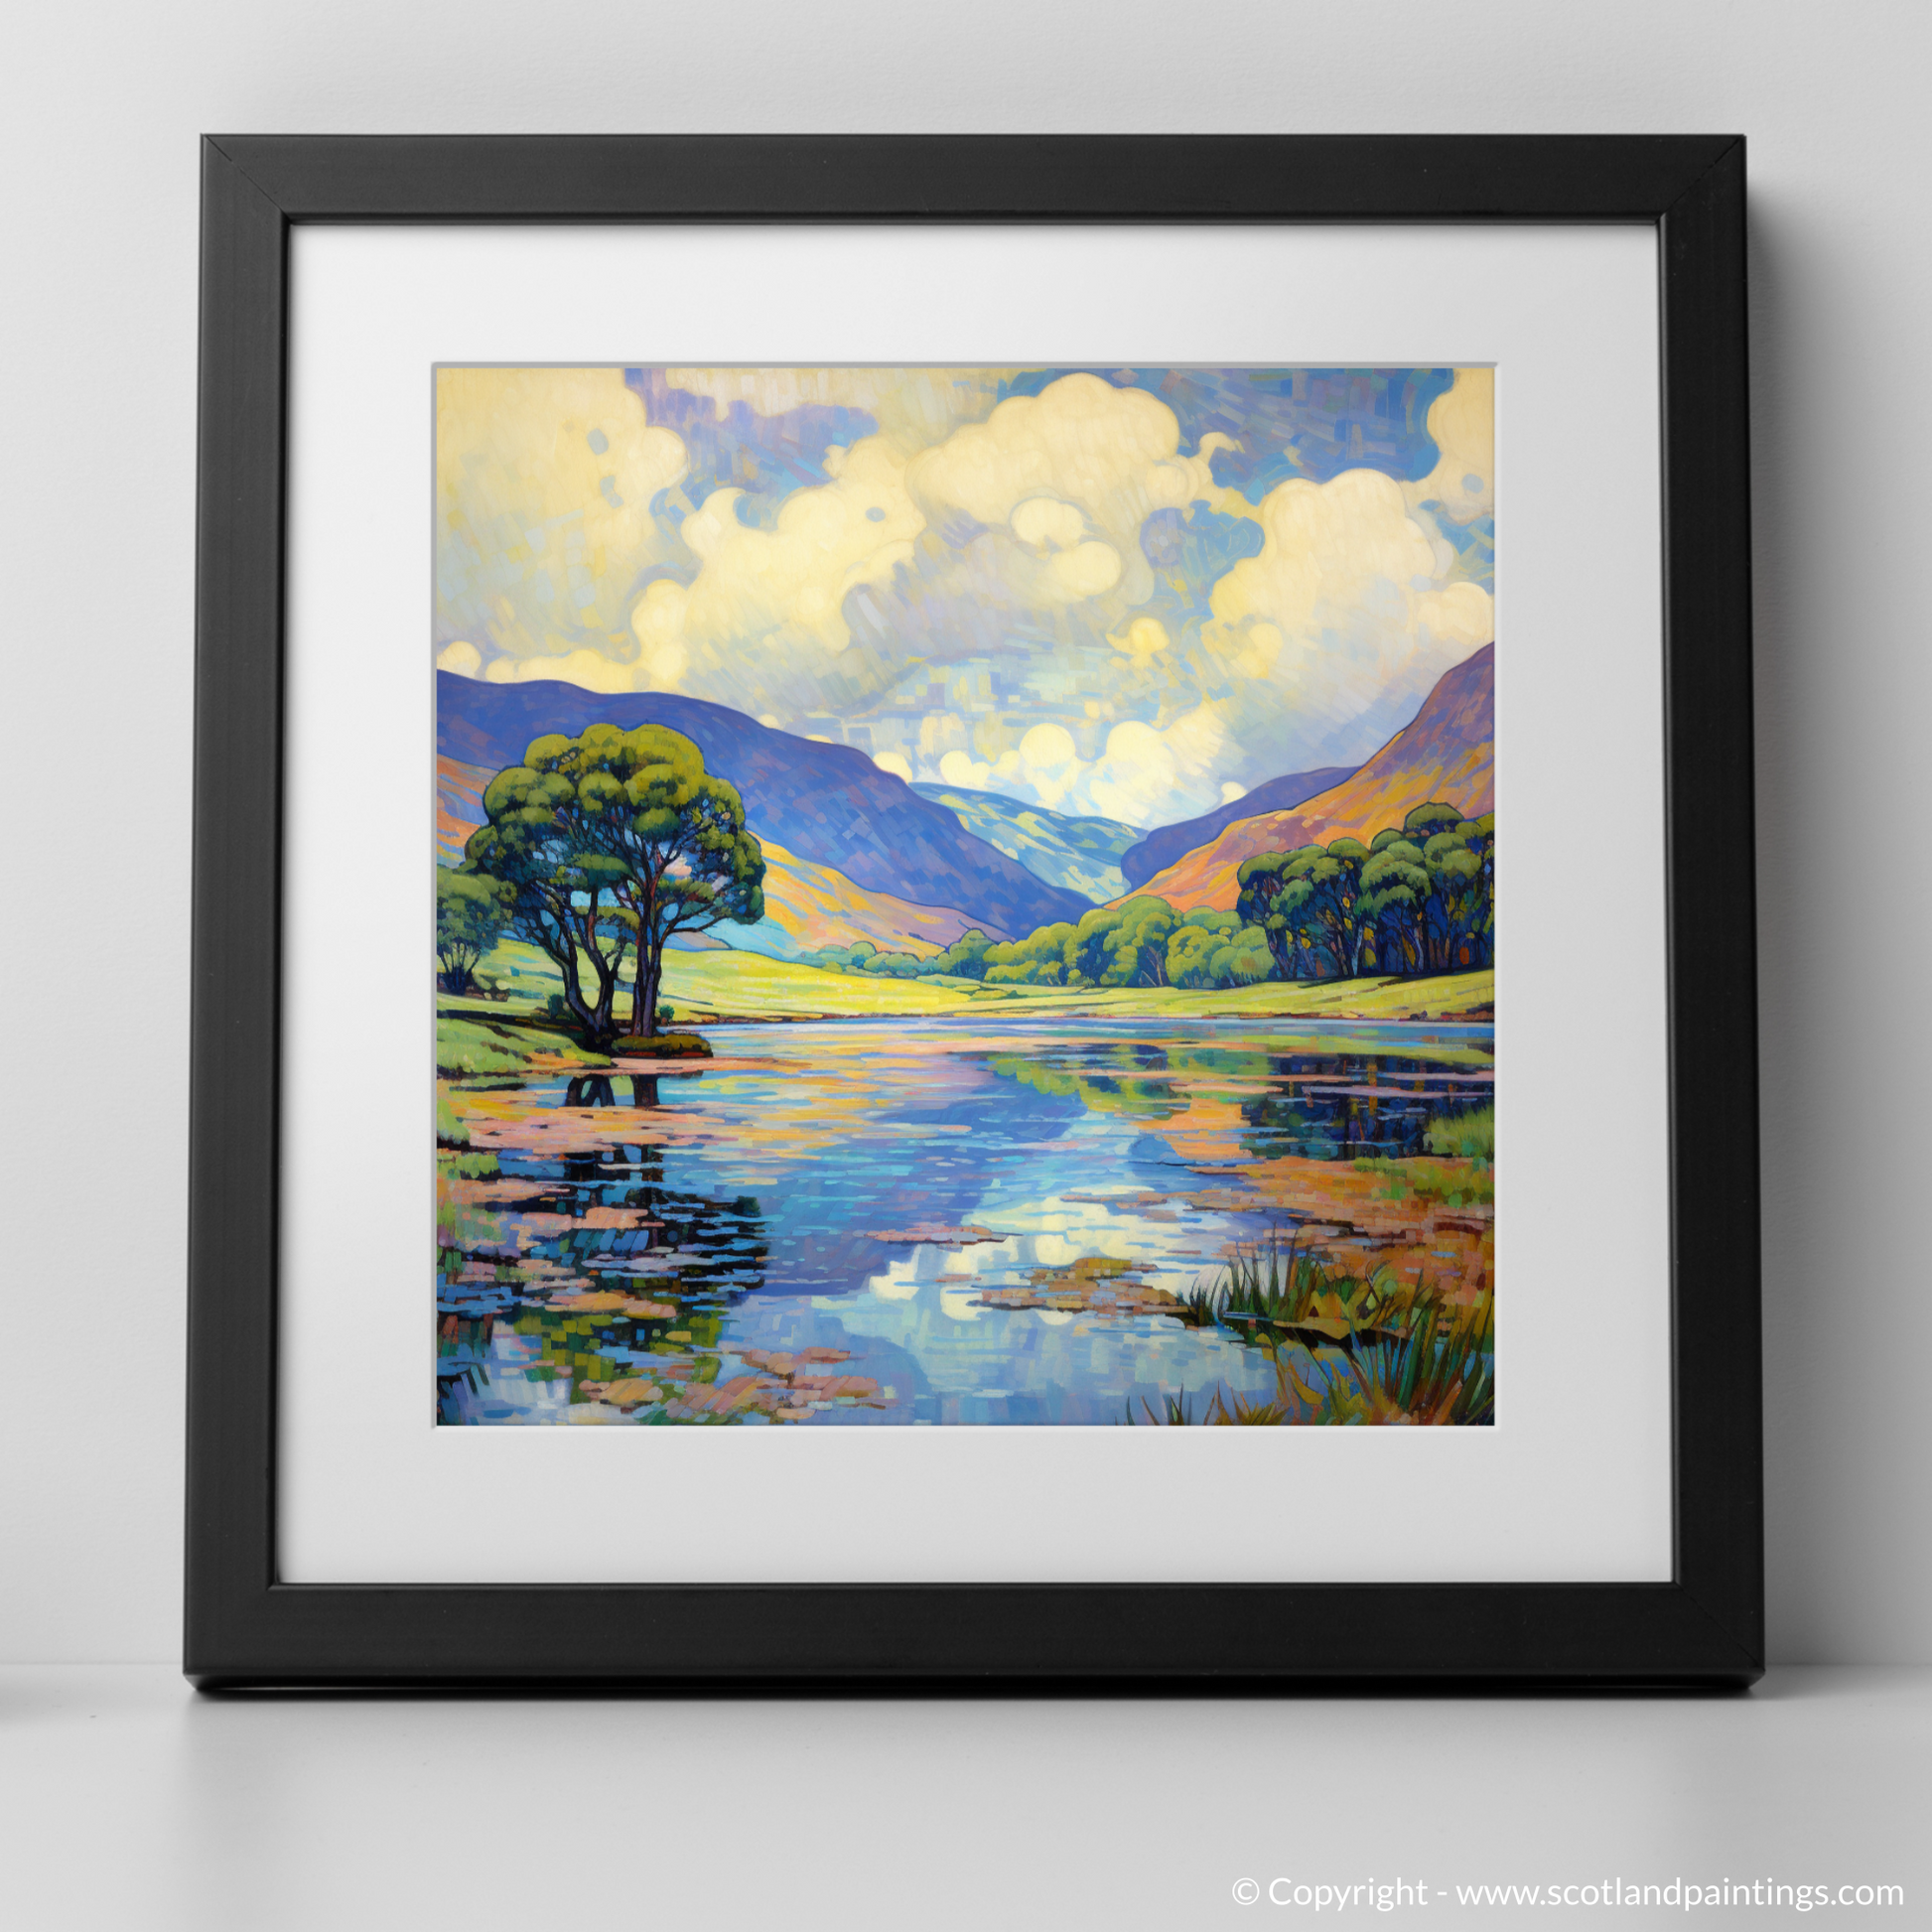 Art Print of Glen Lochay, Perthshire in summer with a black frame